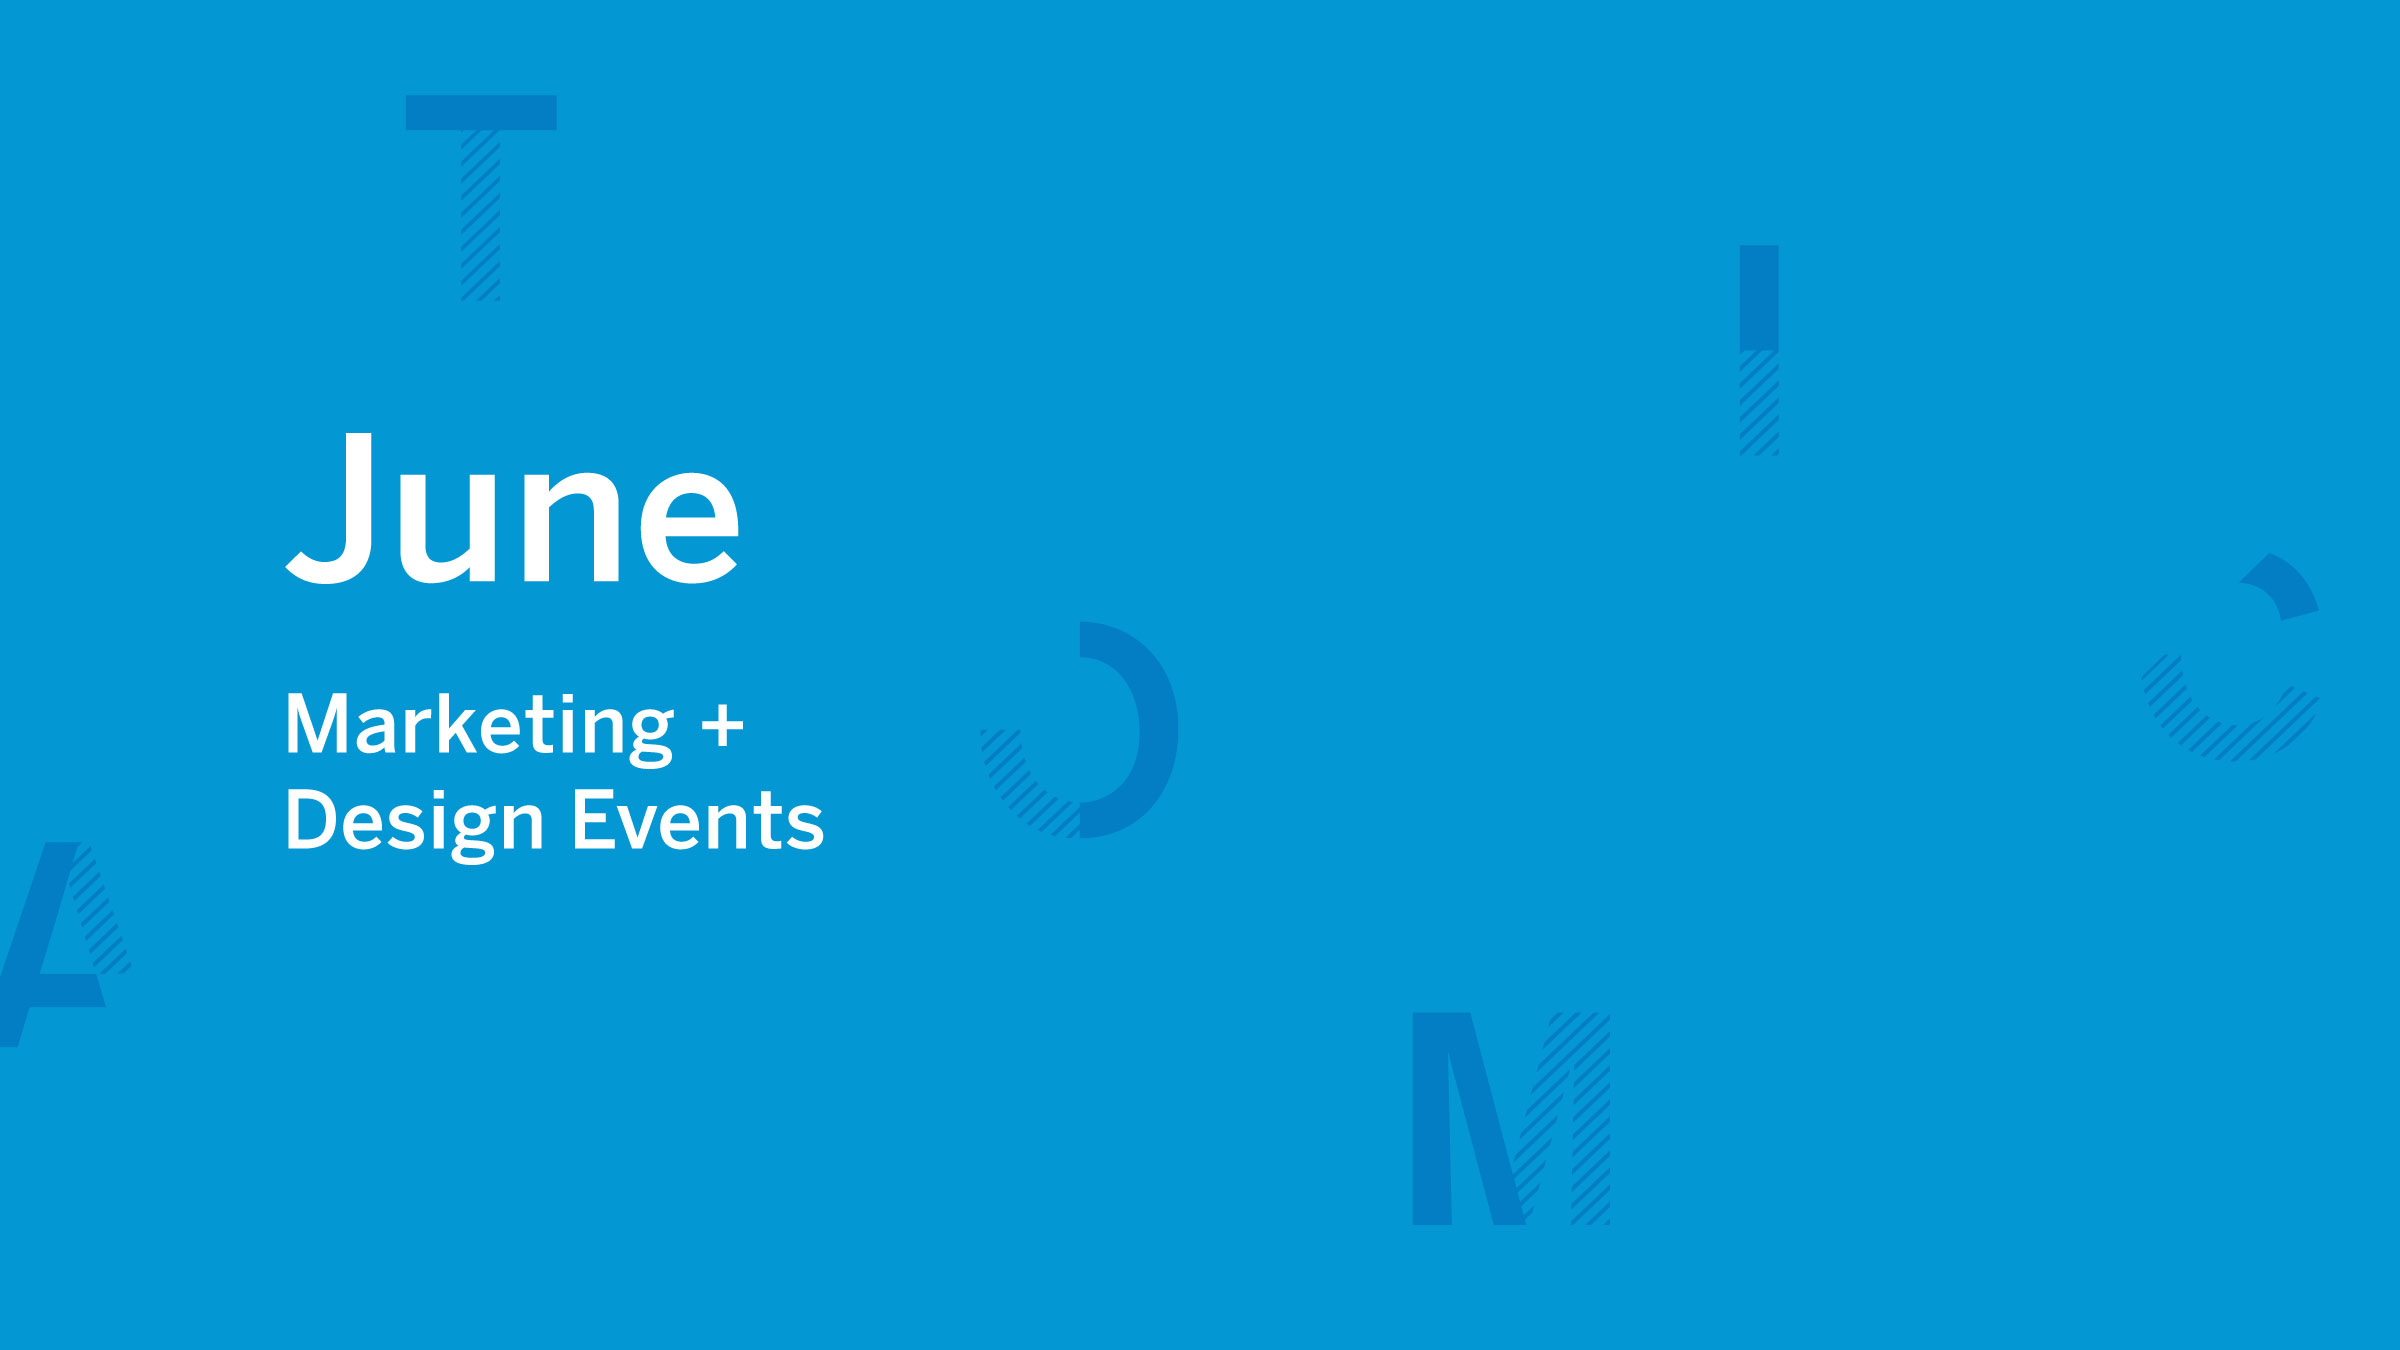 June 2019 marketing and design events